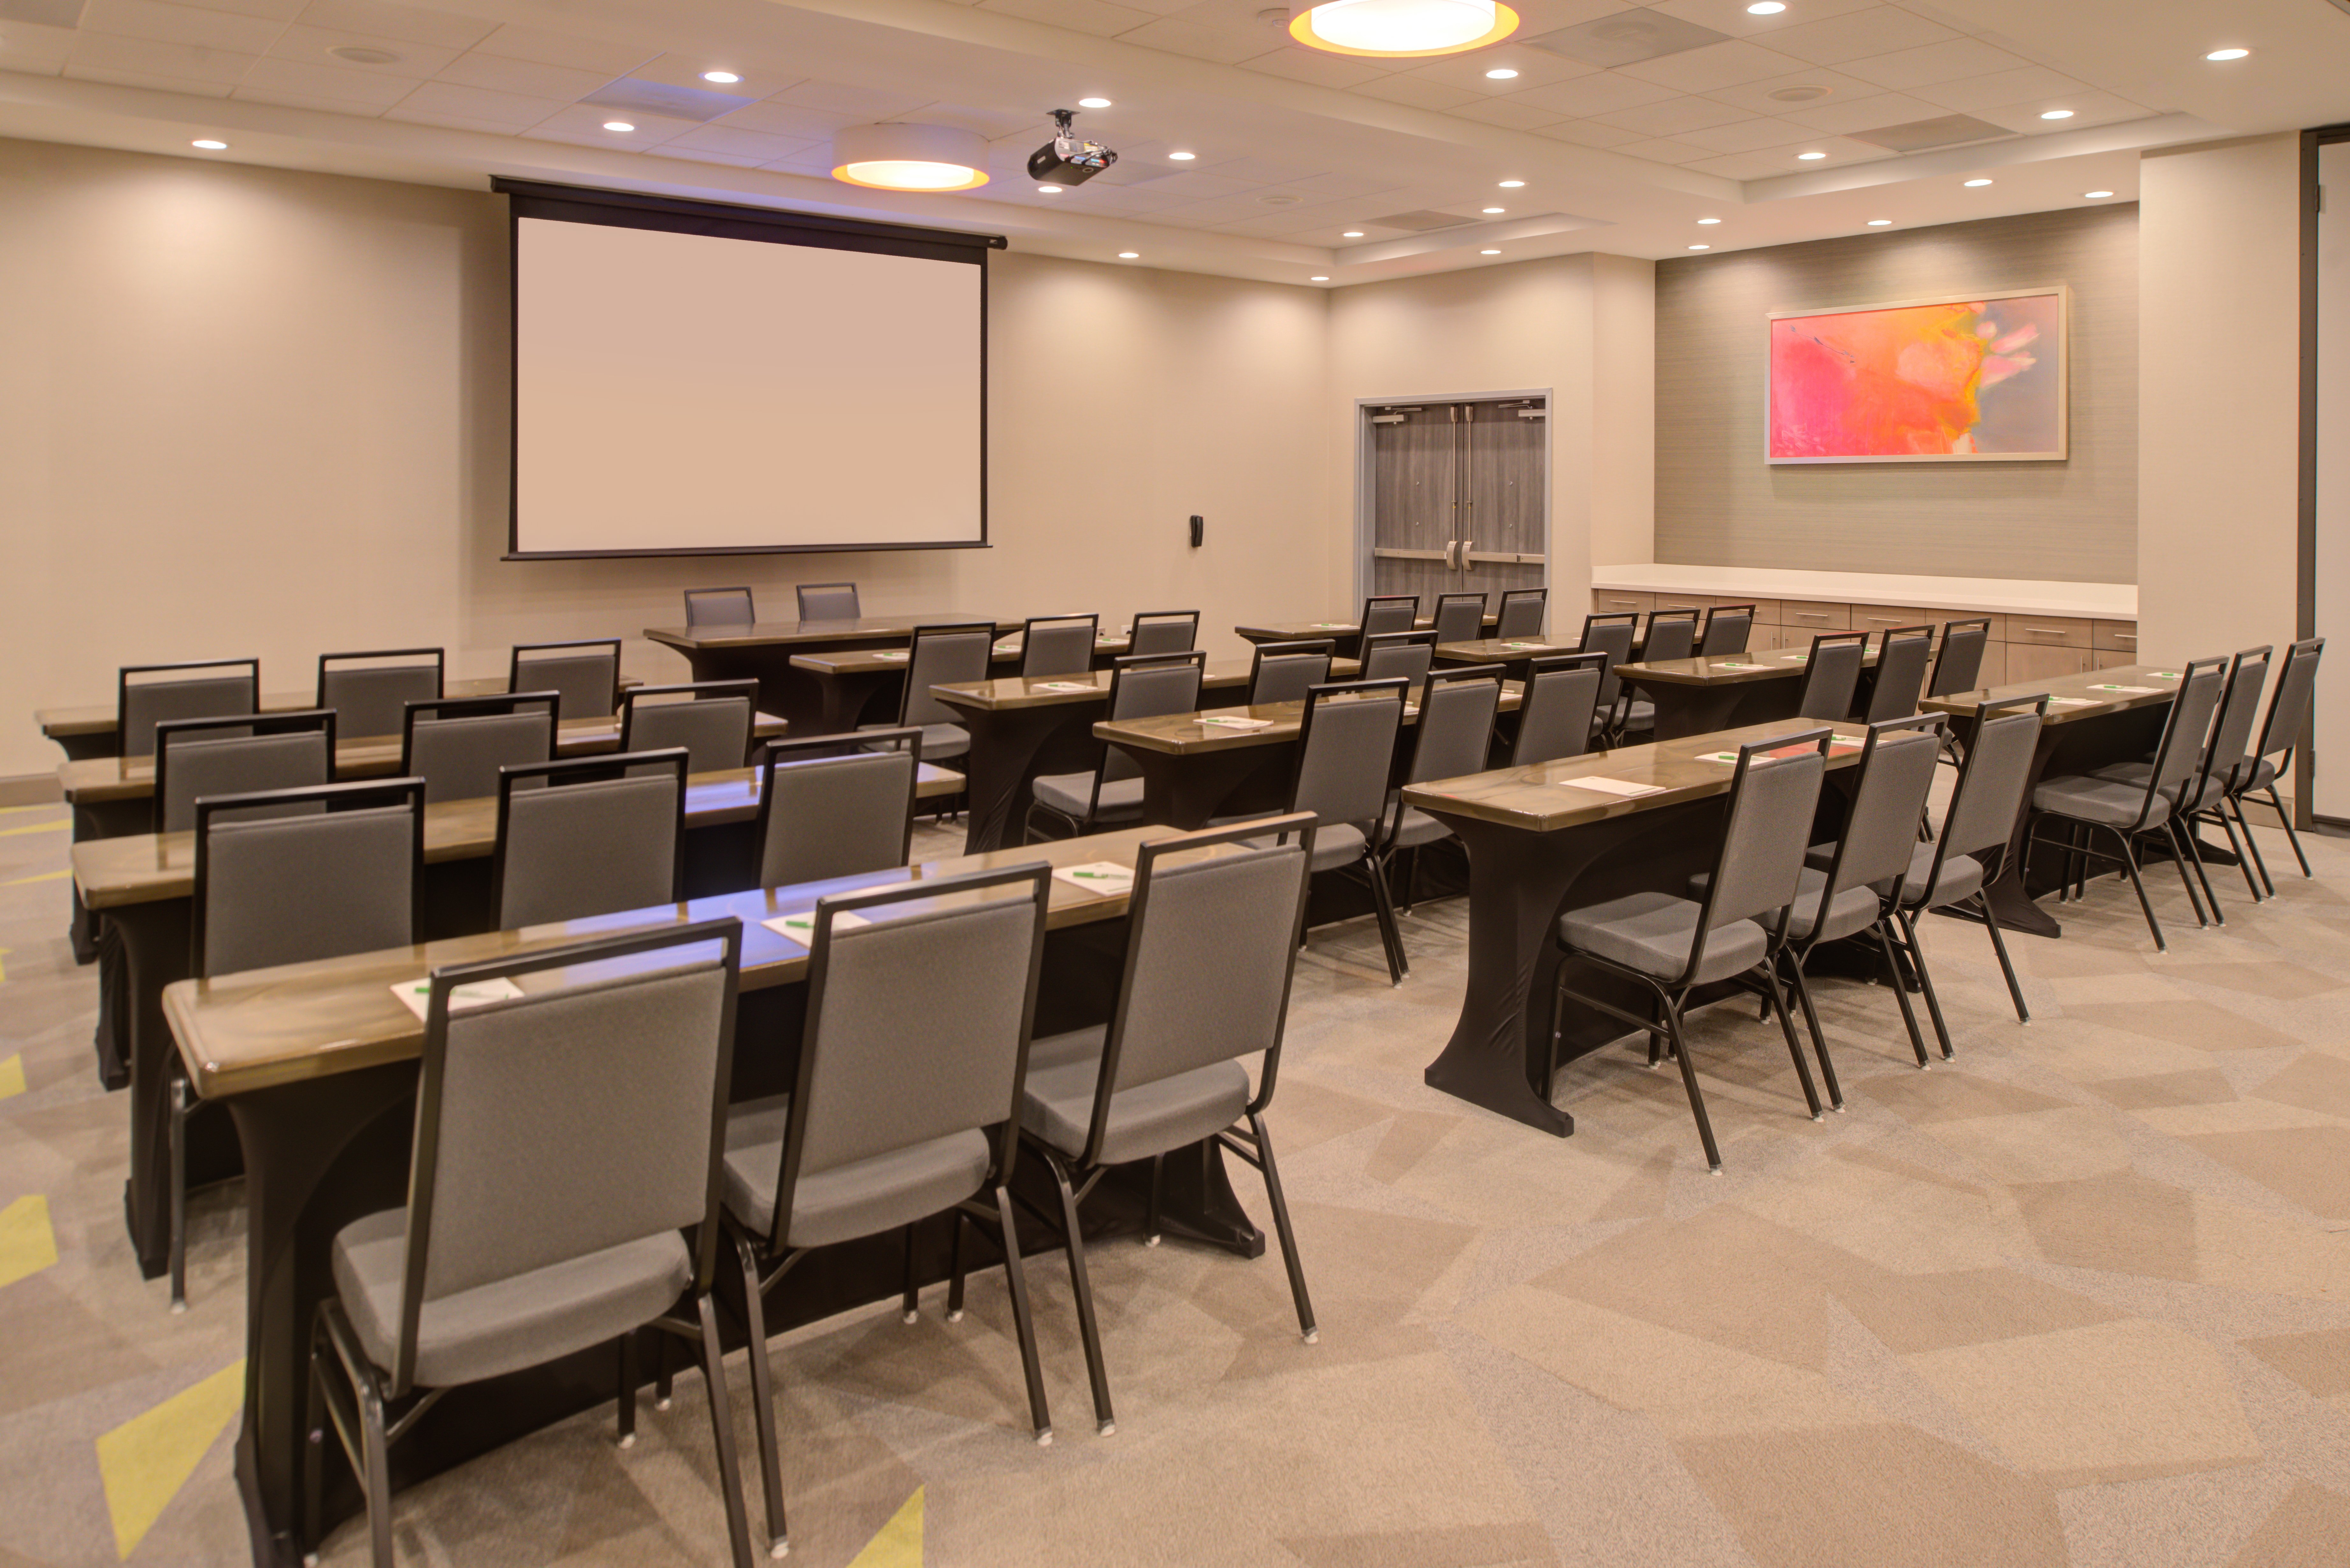 Classroom style is perfect for your next big conference